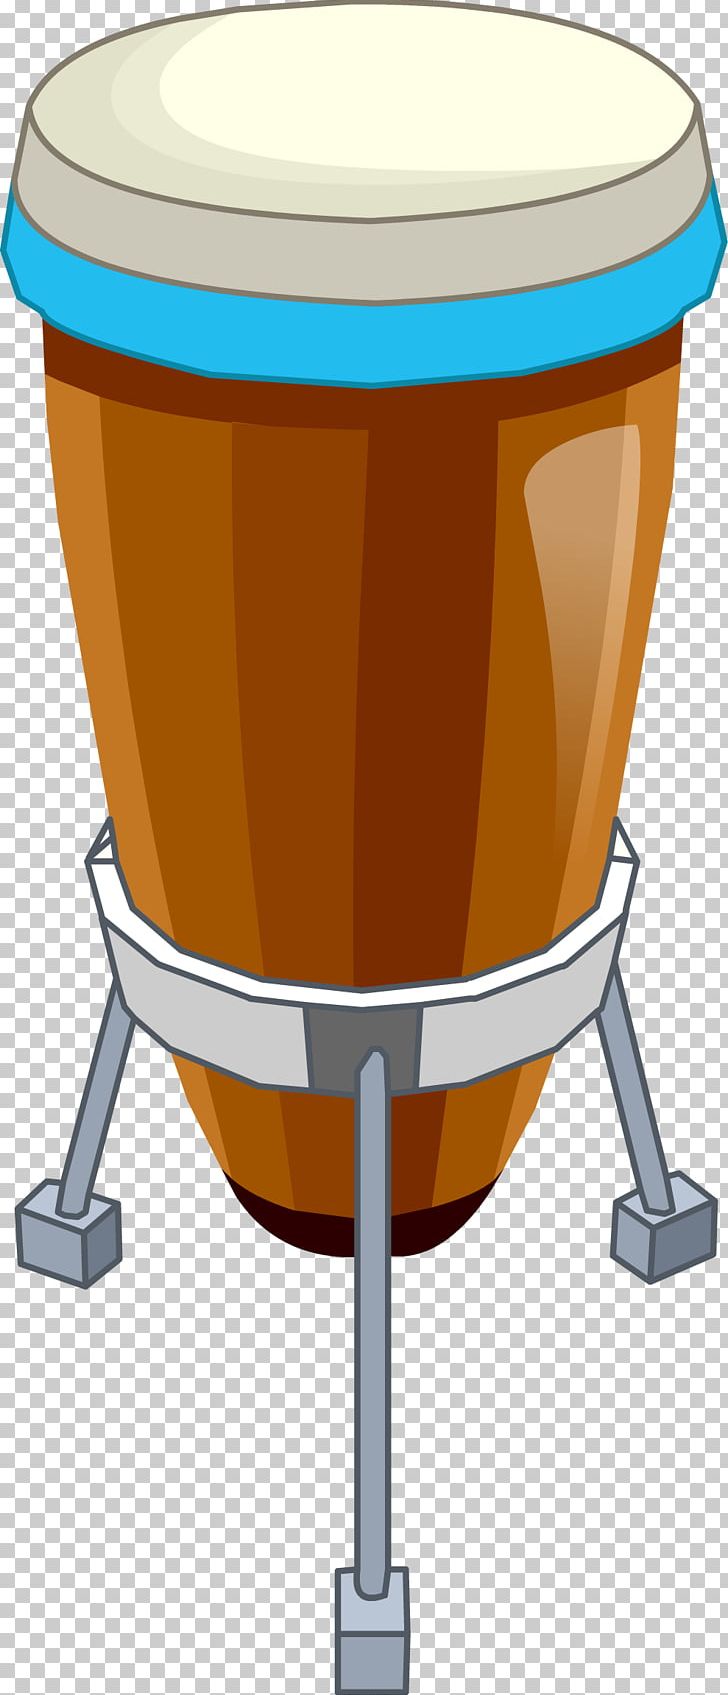 Club Penguin Drum Timbales Conga Musical Instruments PNG, Clipart, Bongo Drum, Club Penguin, Conga, Cookware And Bakeware, Drum Free PNG Download